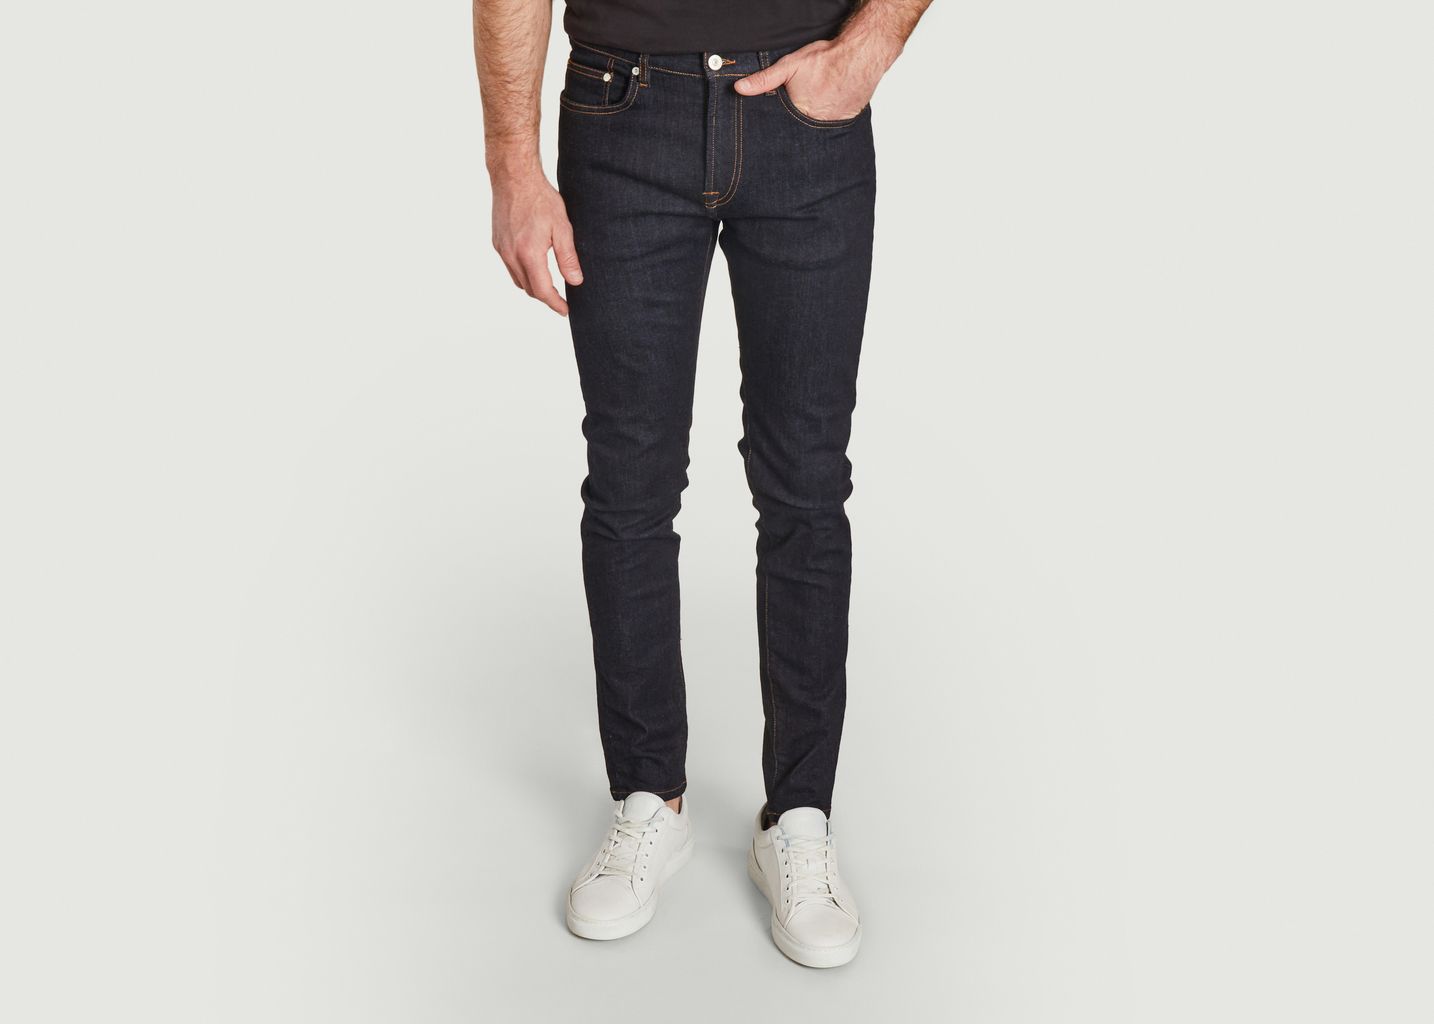 Grobe Jeans - PS by PAUL SMITH